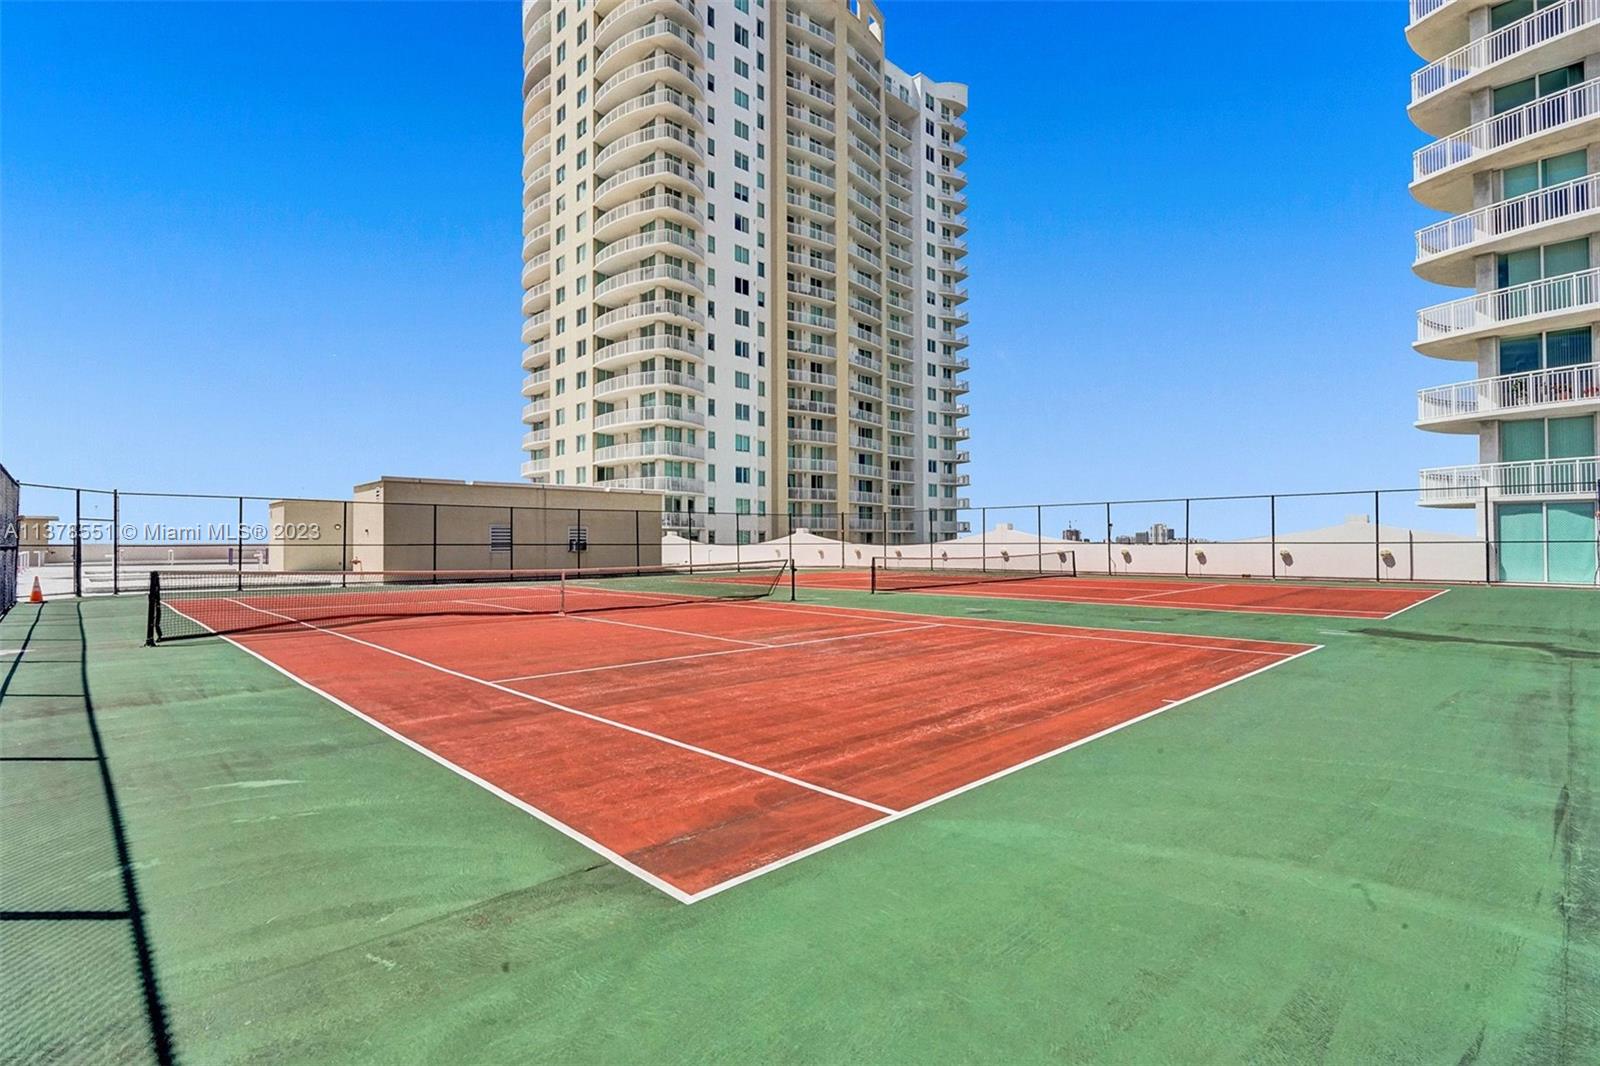 Tennis courts at the top of the parking lot